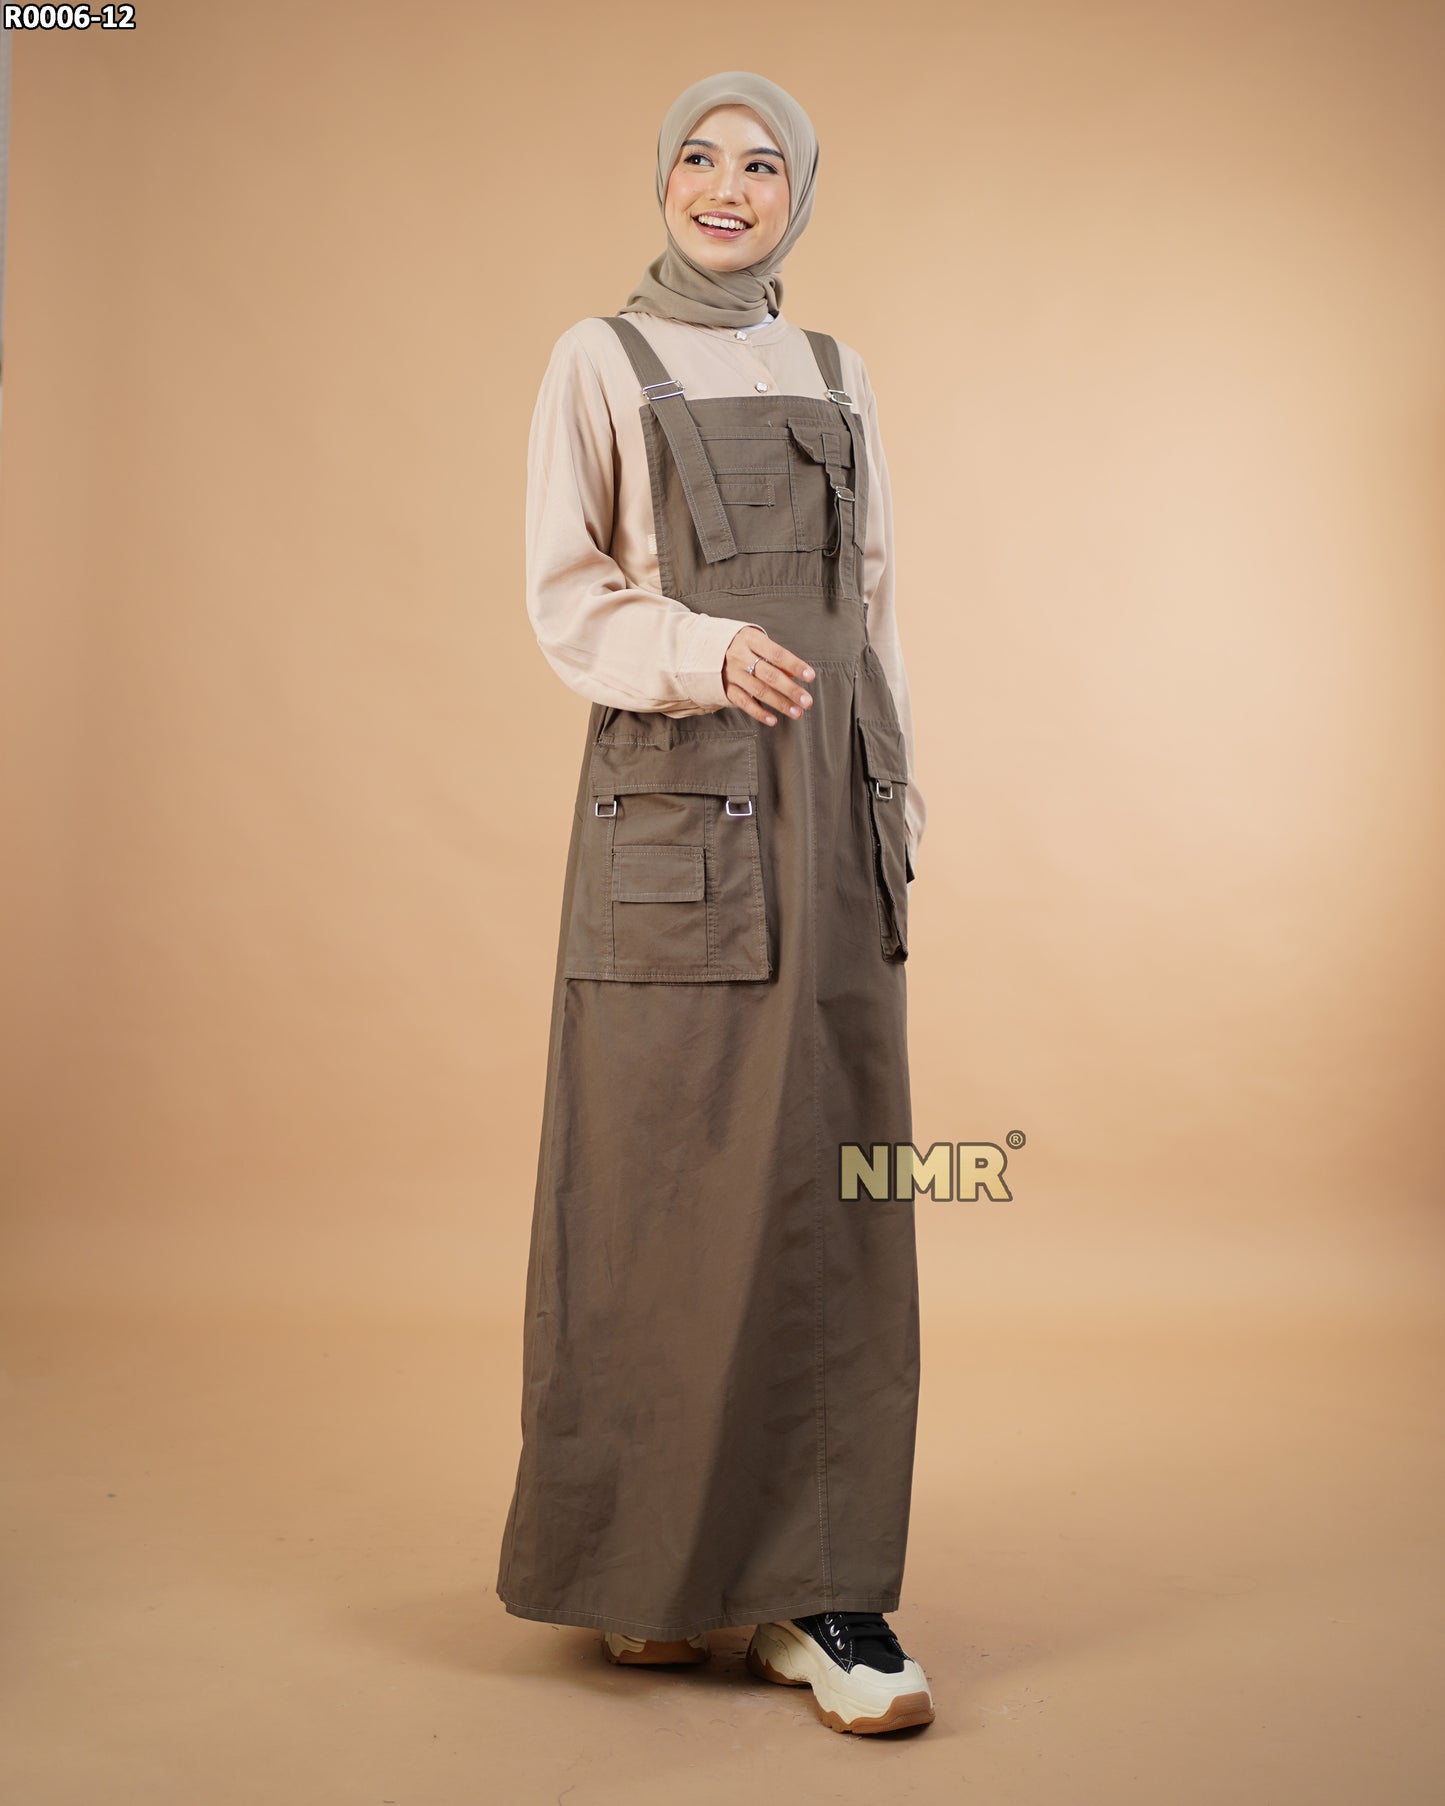 NMR Gamis Jumpsuit Overall Baby Canvas Vol R0006-12